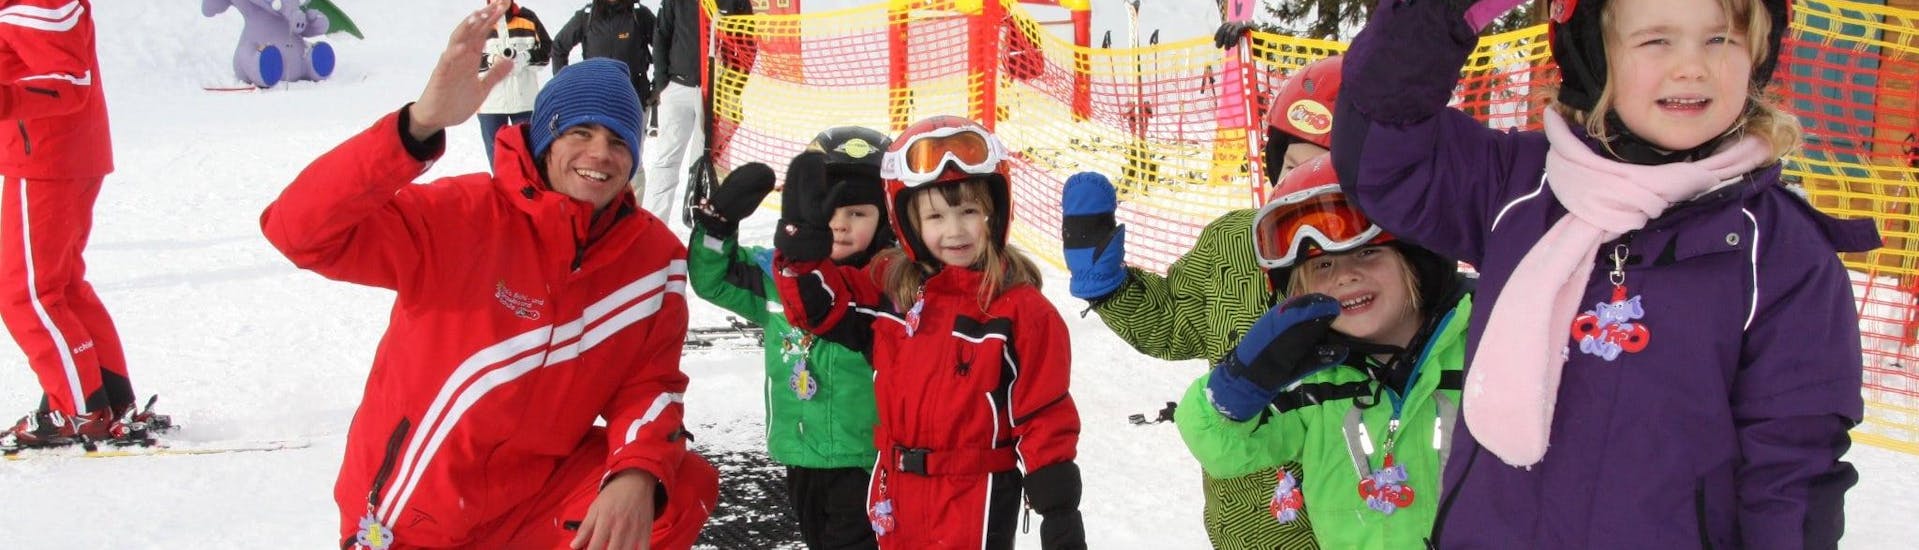 Kids Ski Lessons (from 4 y.) for First Timers.